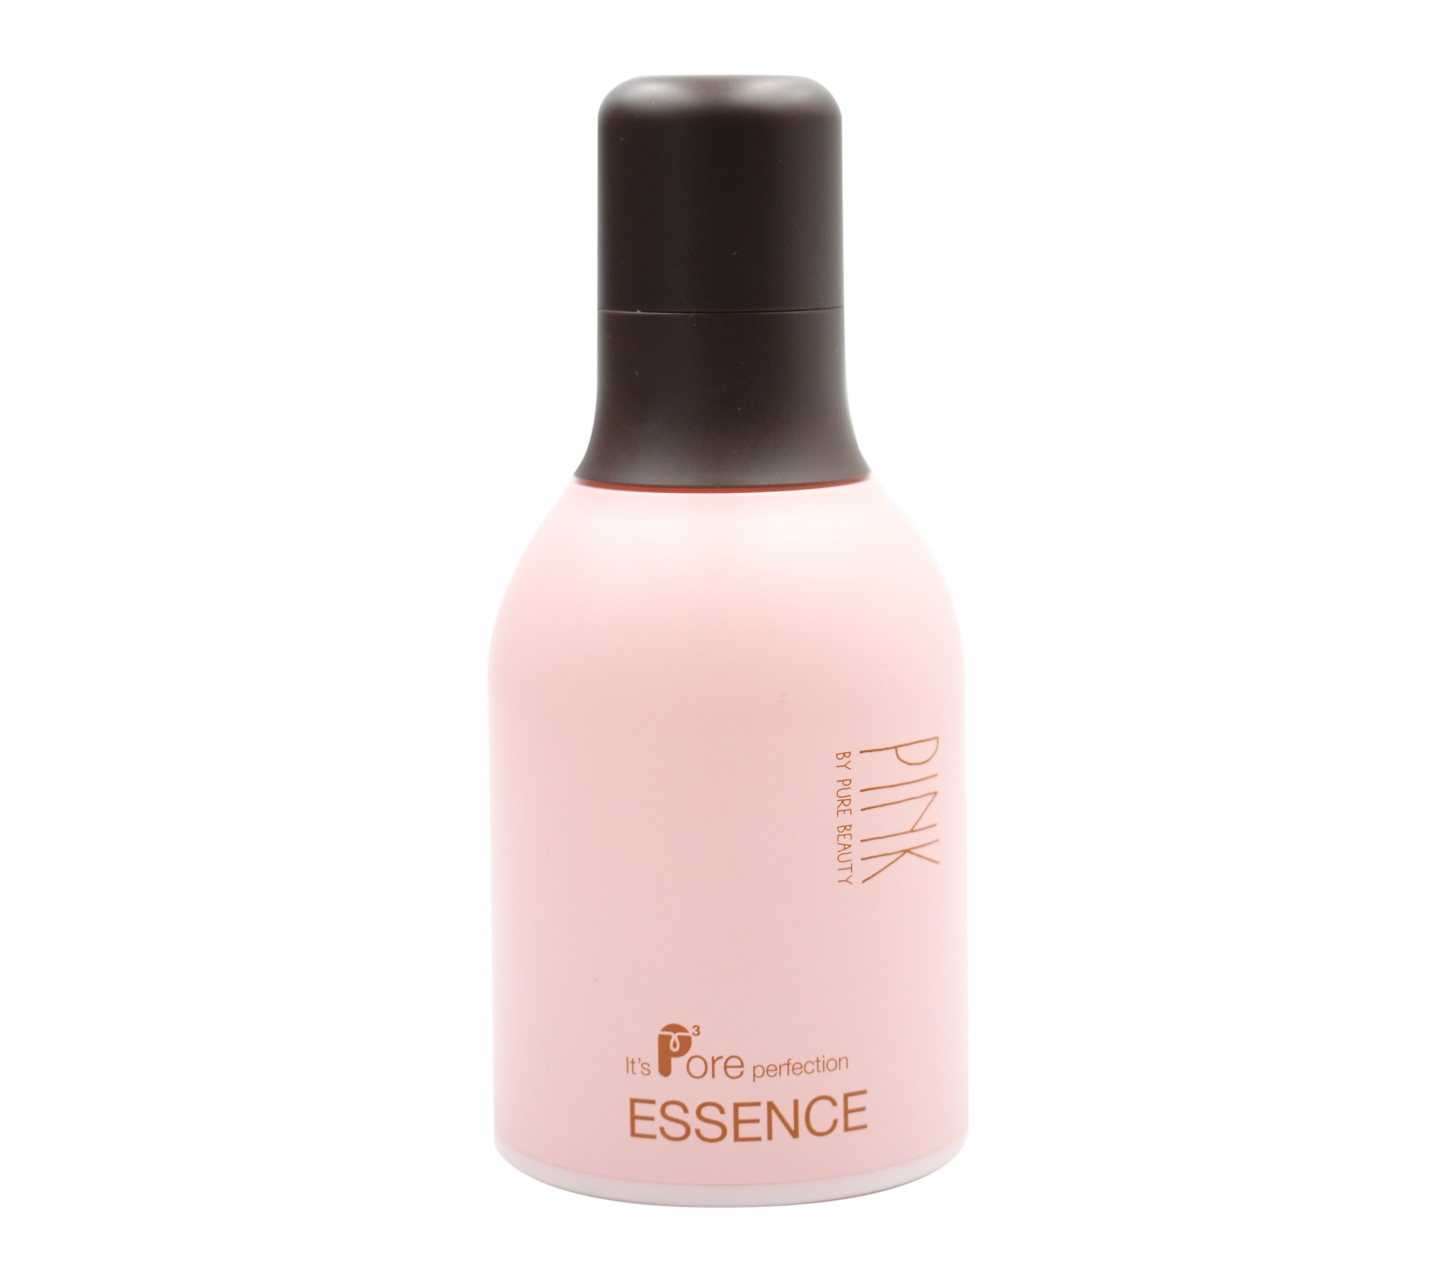 PINK By Pure Beauty It's Pore Perfection Essence Skin Care